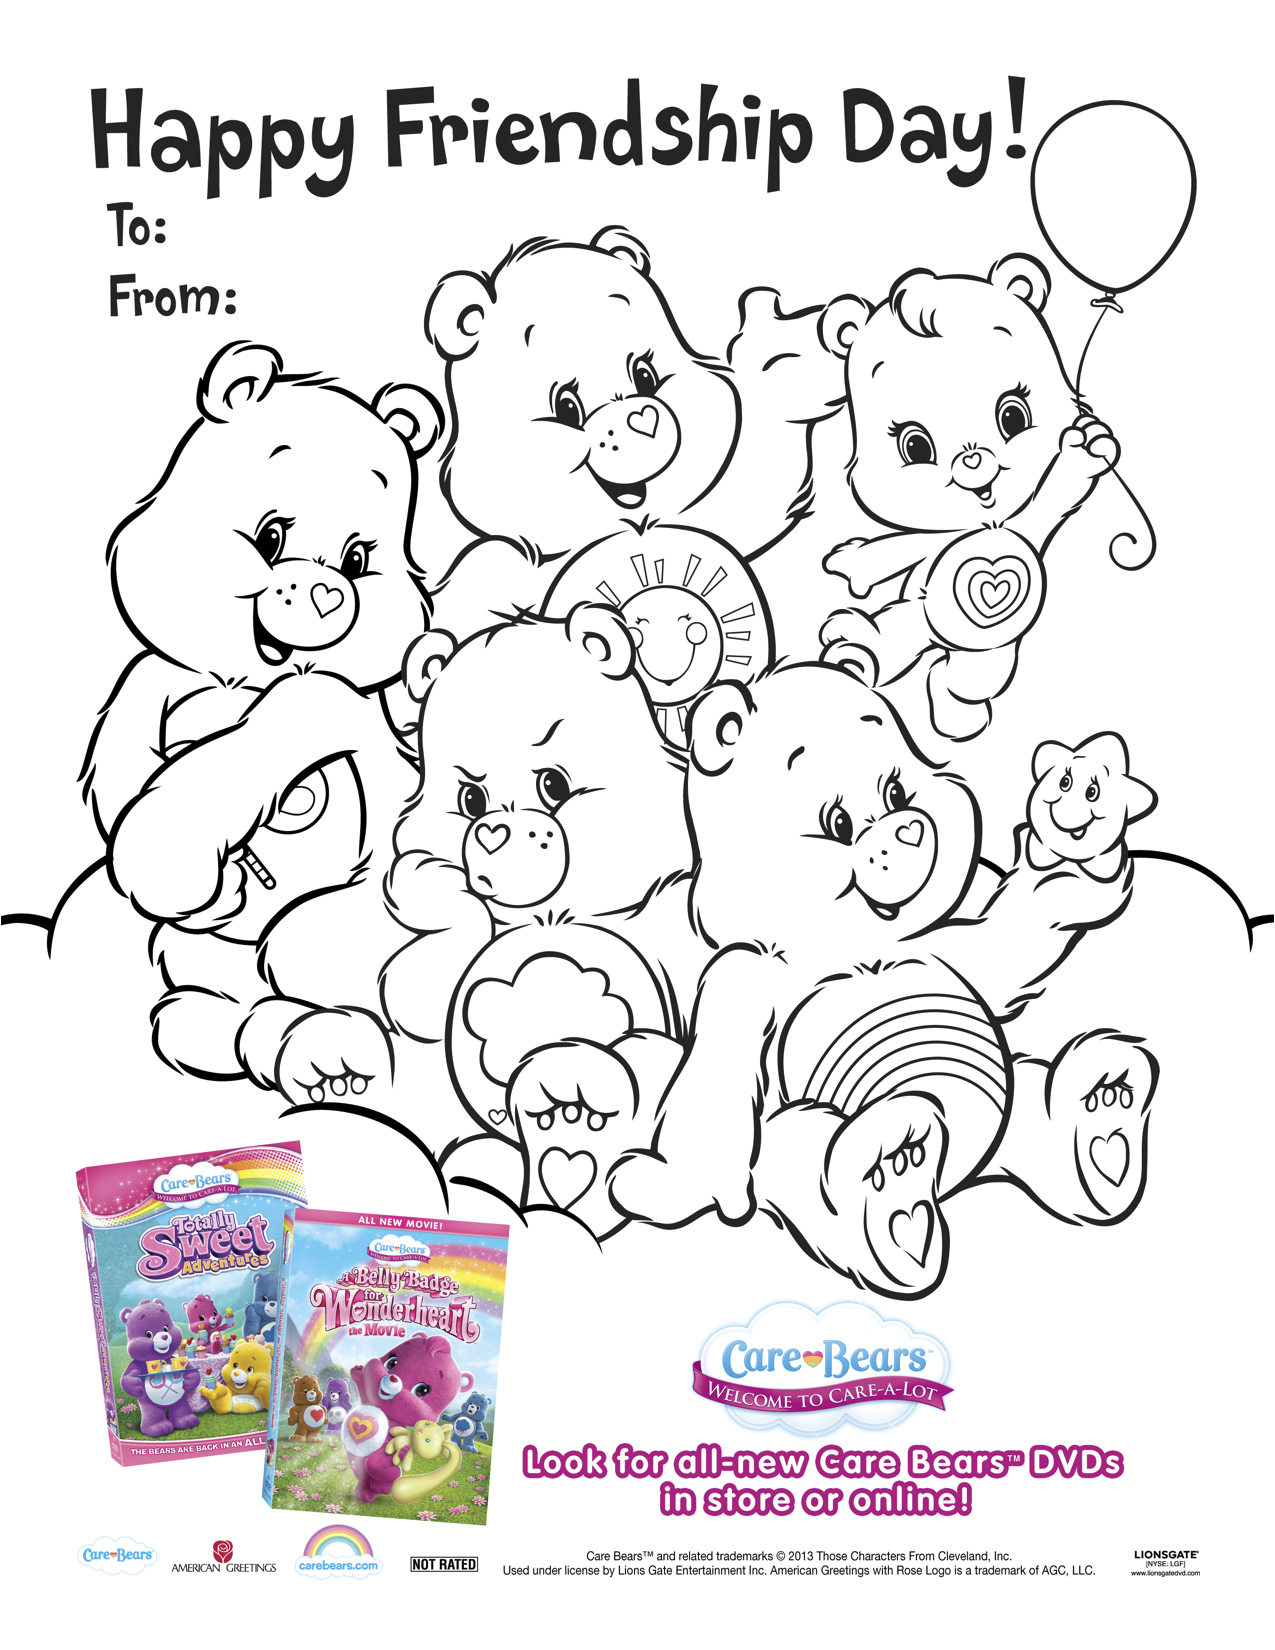 Care bears printable friendship day coloring page